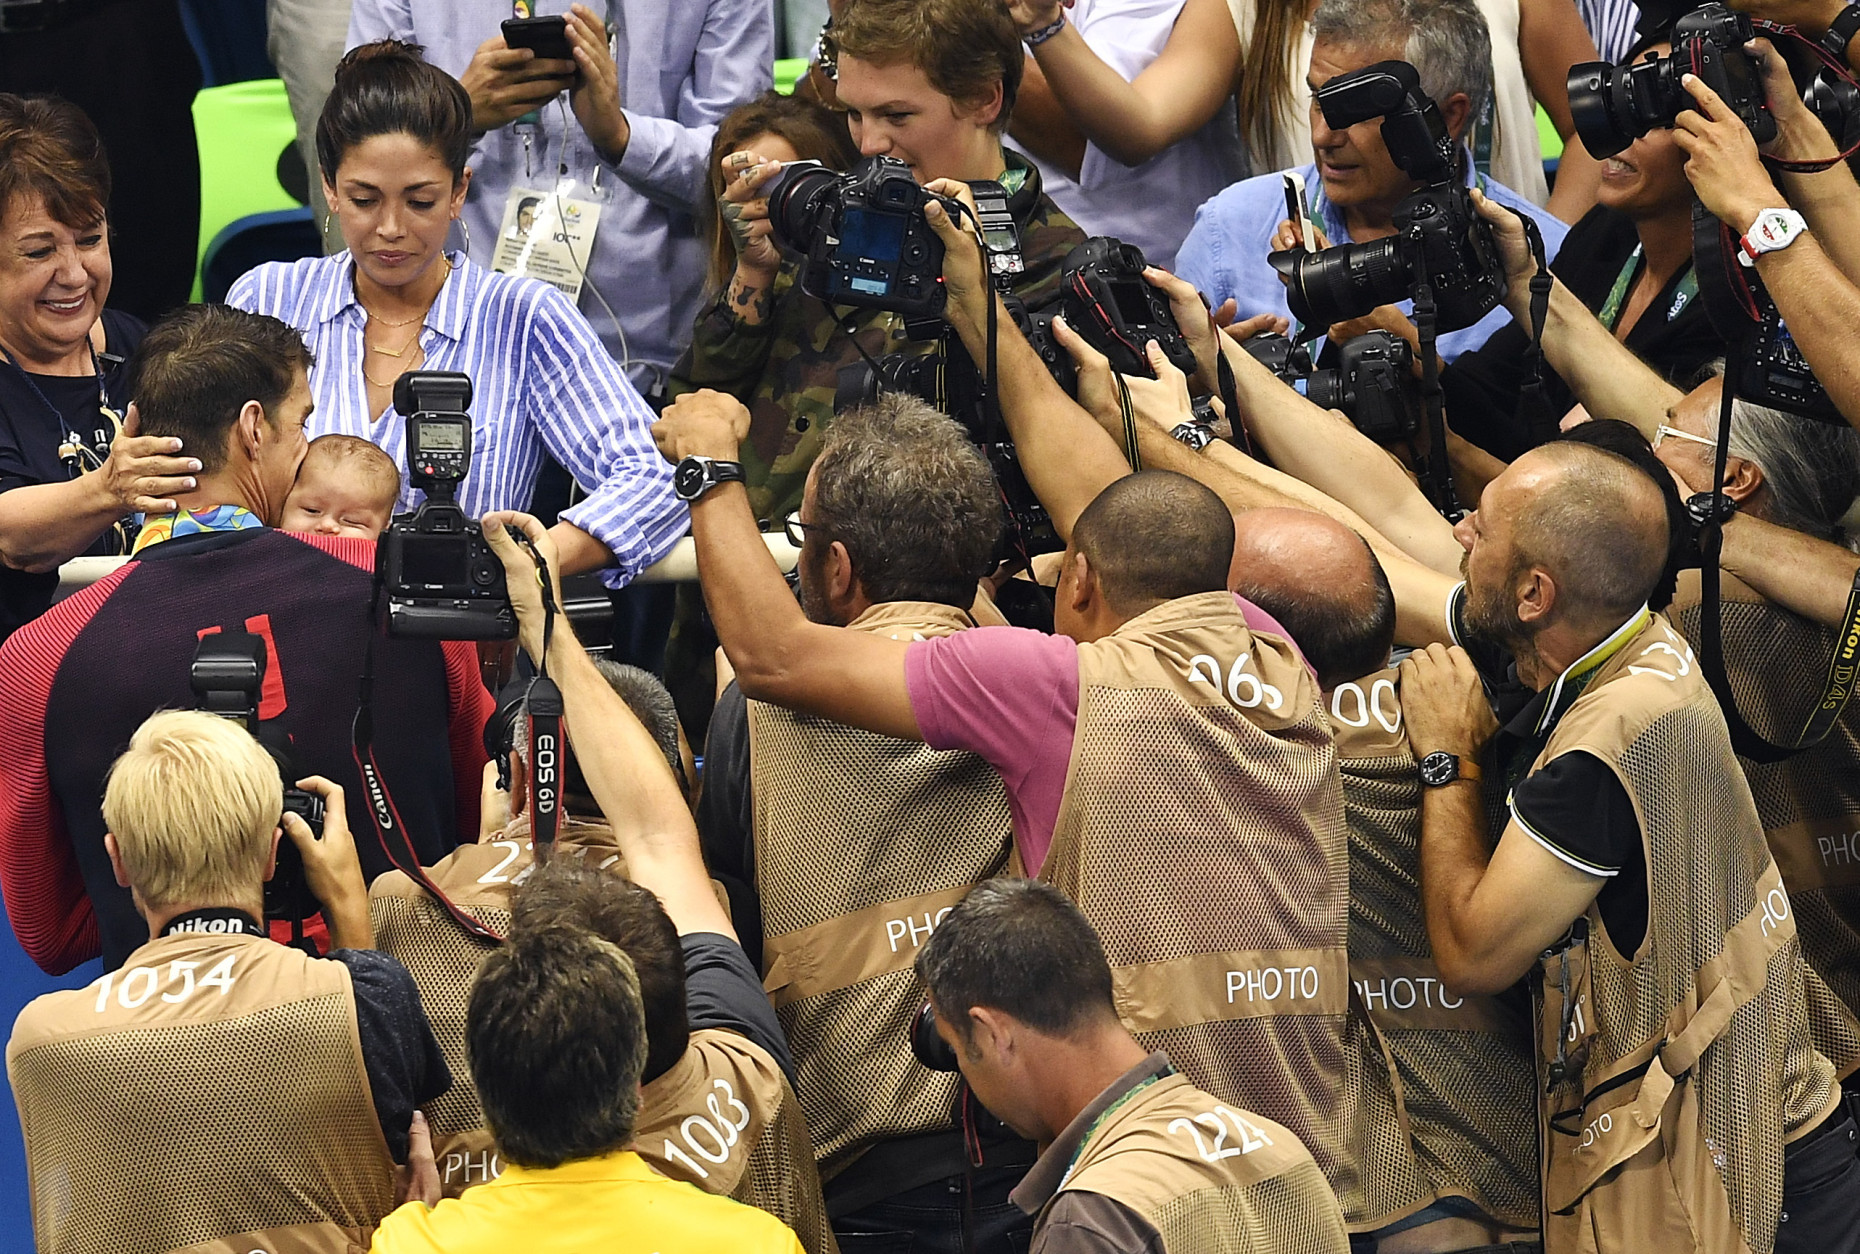 United States' Michael Phelps is surrounded by media as he kisses his son Boomer, held by his fiancee Nicole Johnson, second left, after winning the gold medal in the men's 200-meter butterfly final during the swimming competitions at the 2016 Summer Olympics, Tuesday, Aug. 9, 2016, in Rio de Janeiro, Brazil. (AP Photo/Martin Meissner)